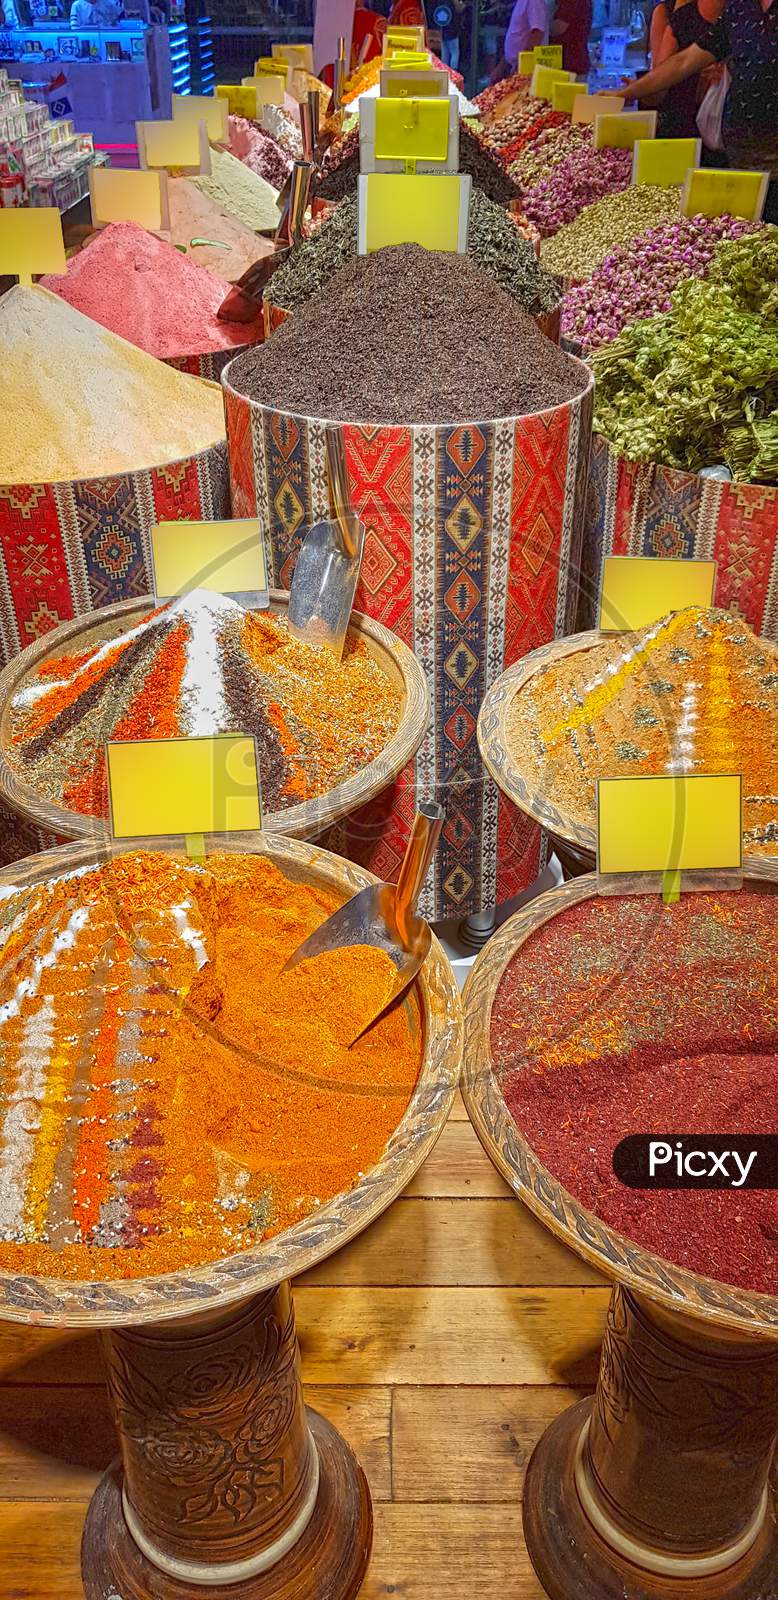 Spices For Sale In Bazaar